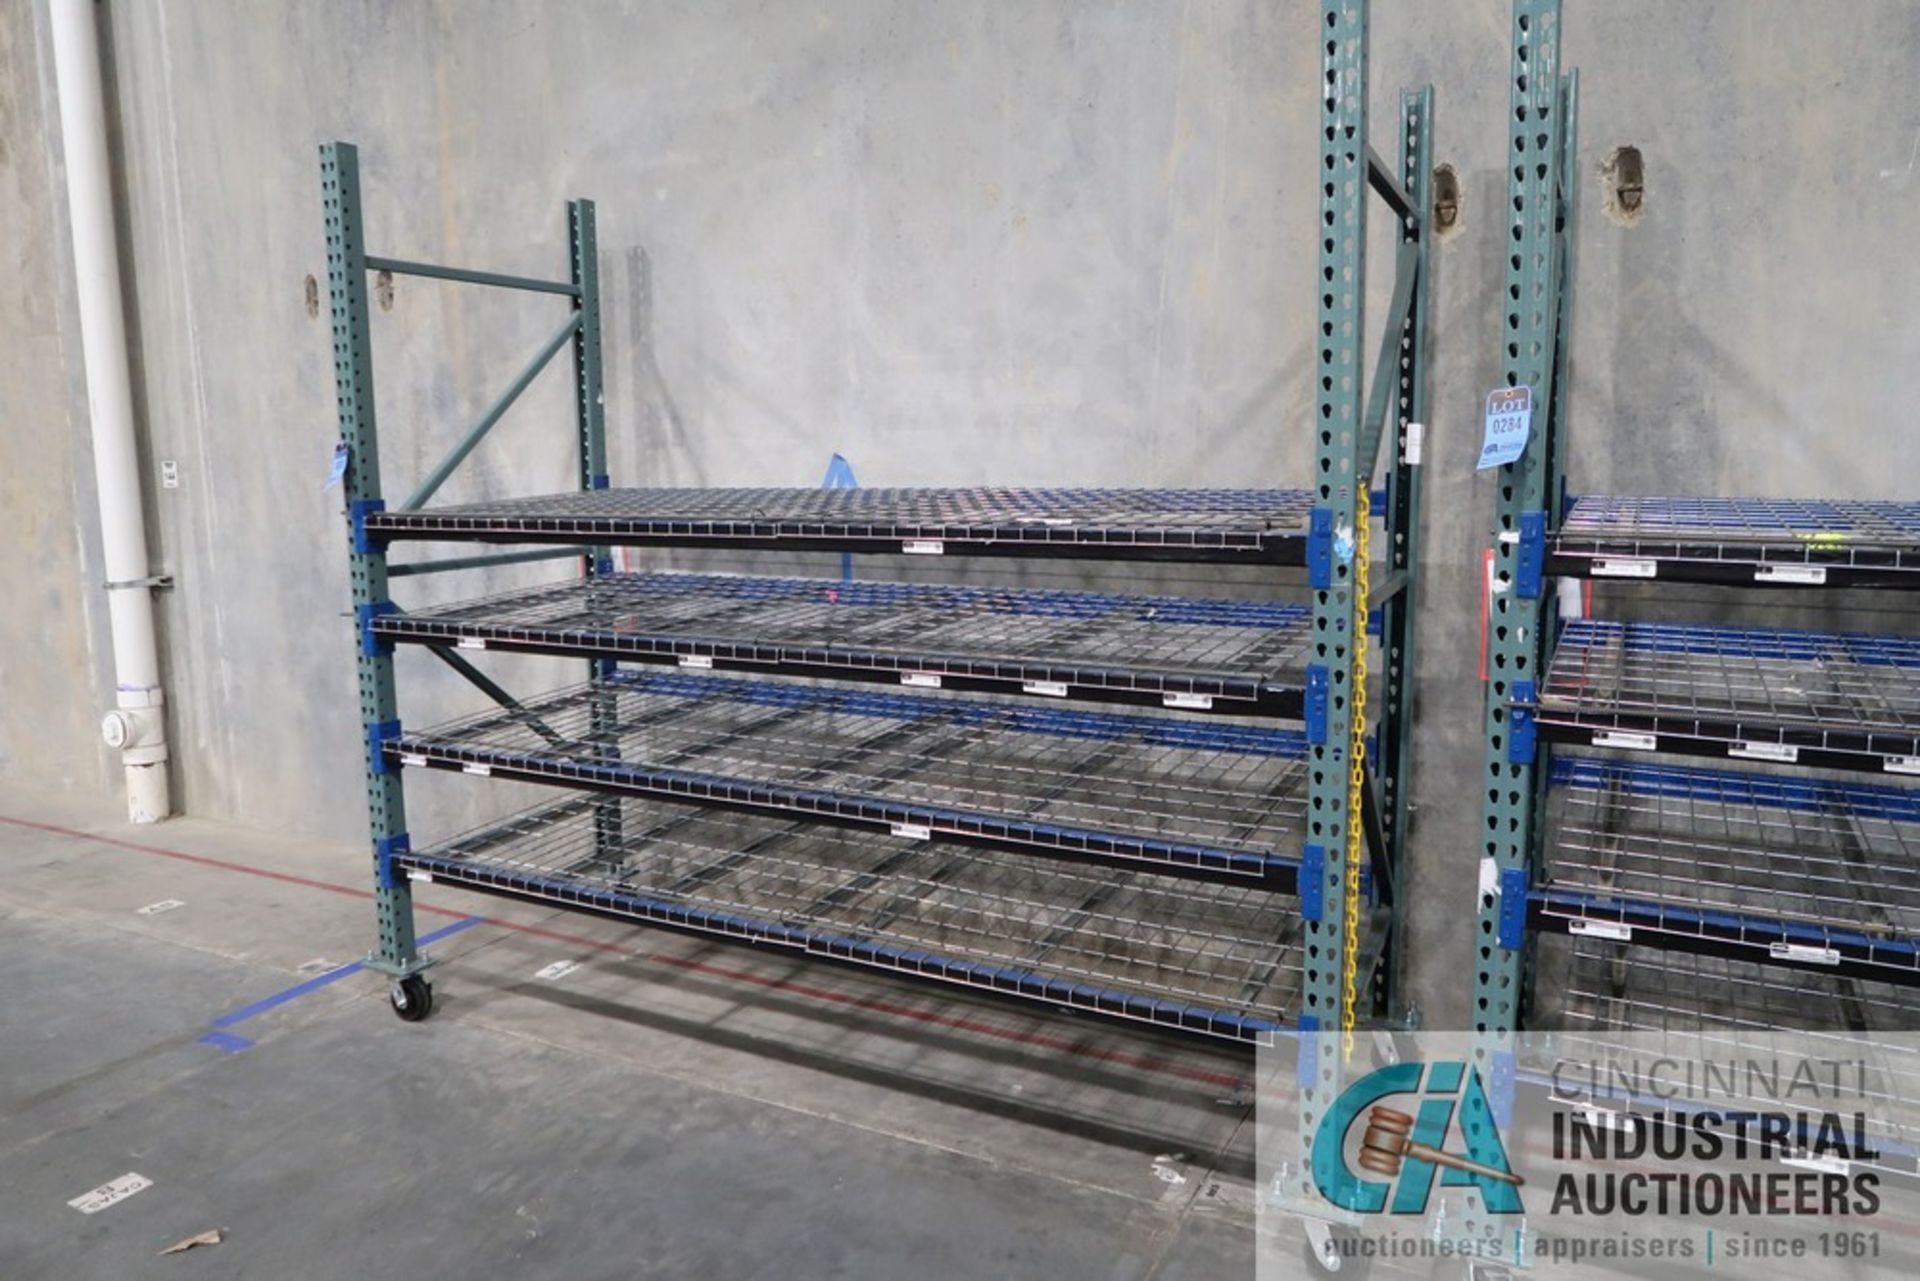 SECTION 108" LONG X 42" WIDE X 96" PORTABLE TEARDROP STYLE PALLET RACK WITH (2) 42" X 96" - Image 3 of 3